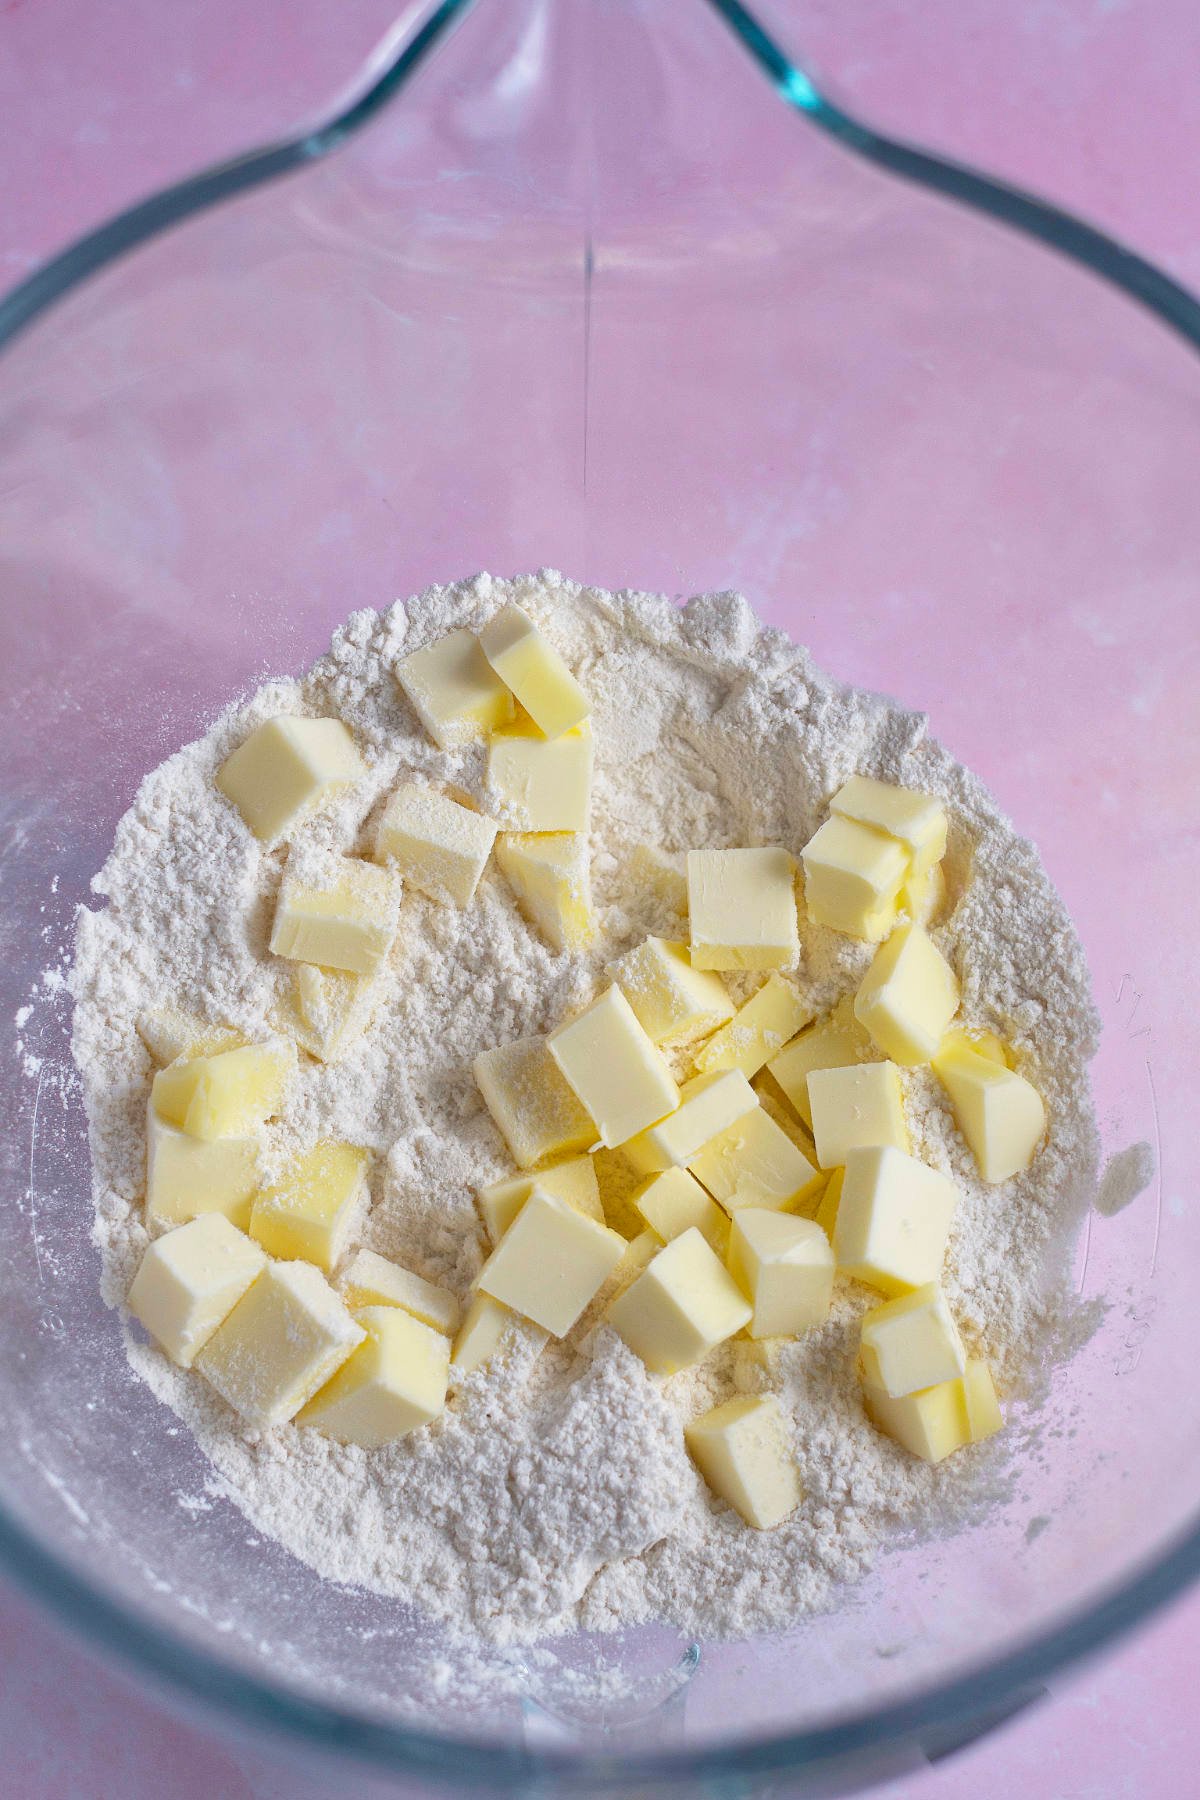 cubes of butter added to dry ingredients in a mixing bowl